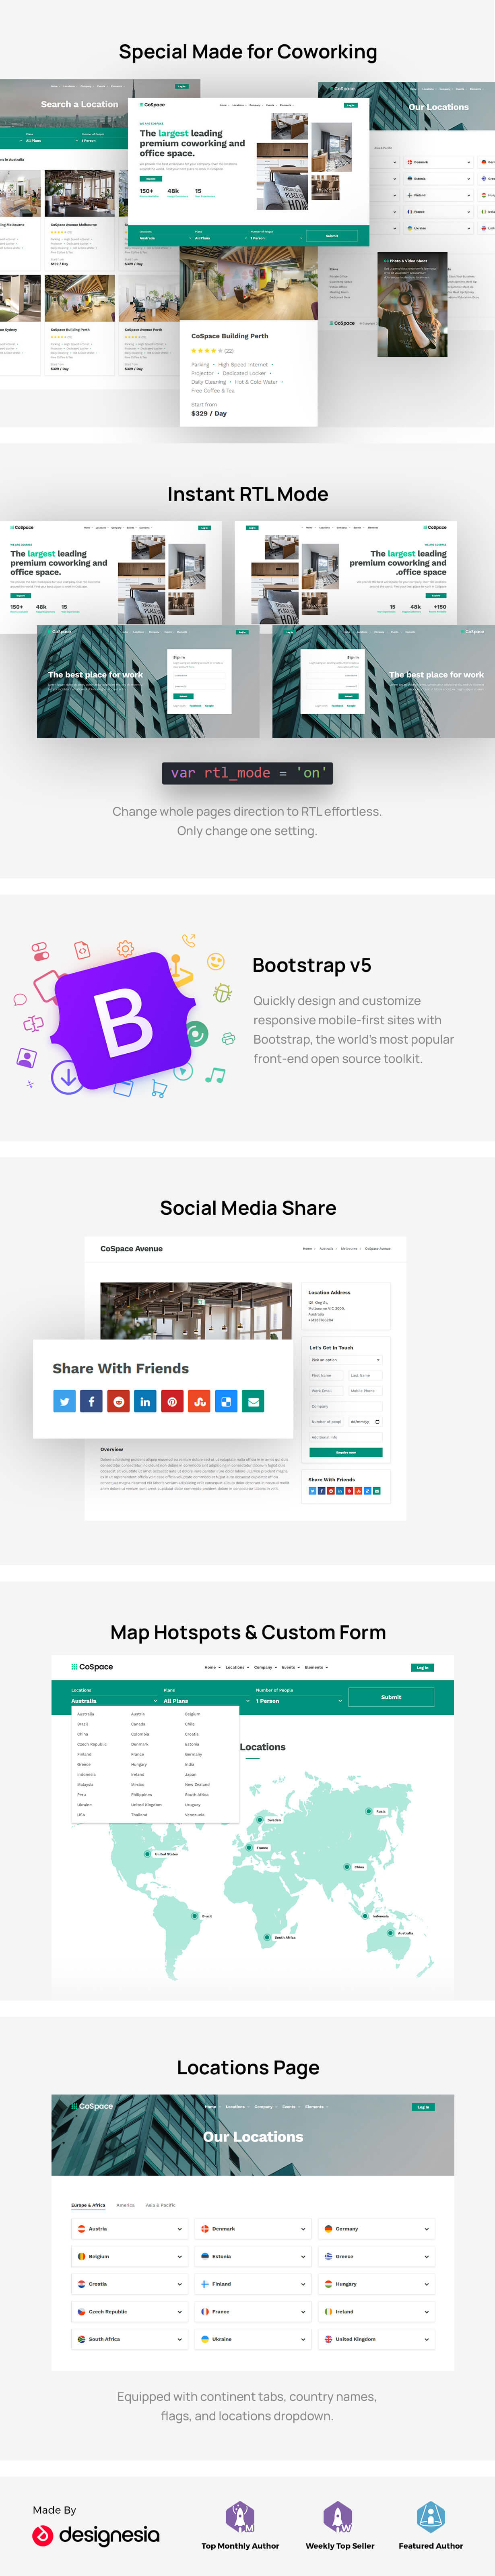 CoSpace - Coworking Company & Events HTML Template + RTL - 1